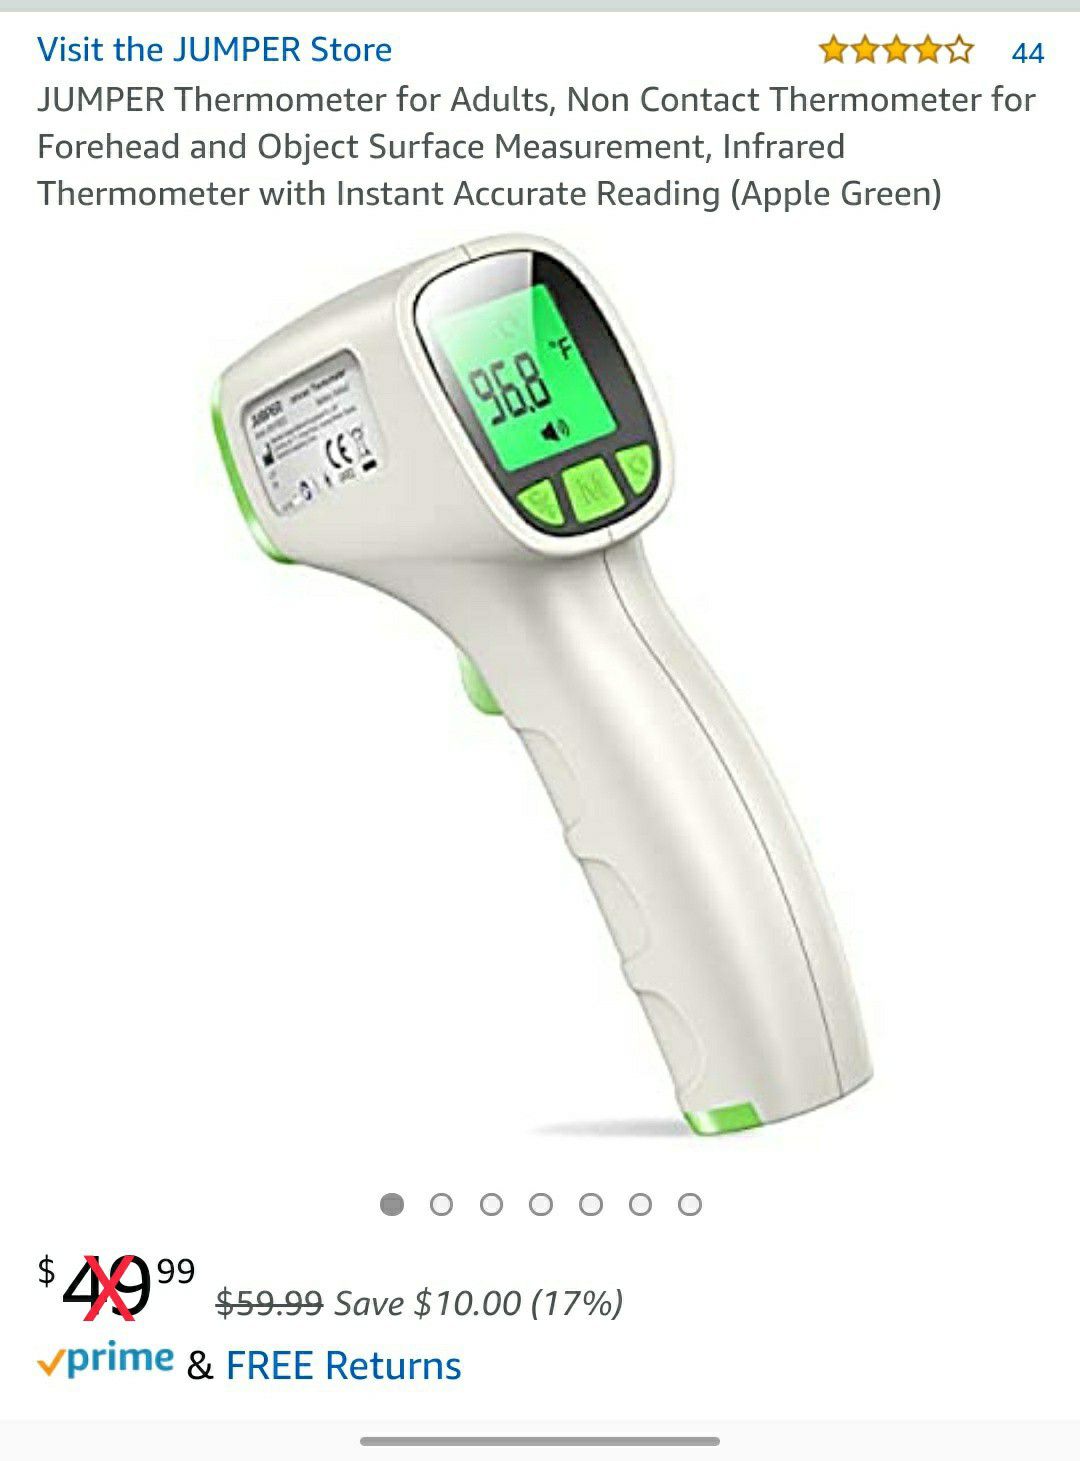 New Thermometer for Adults, Non Contact Thermometer for Forehead